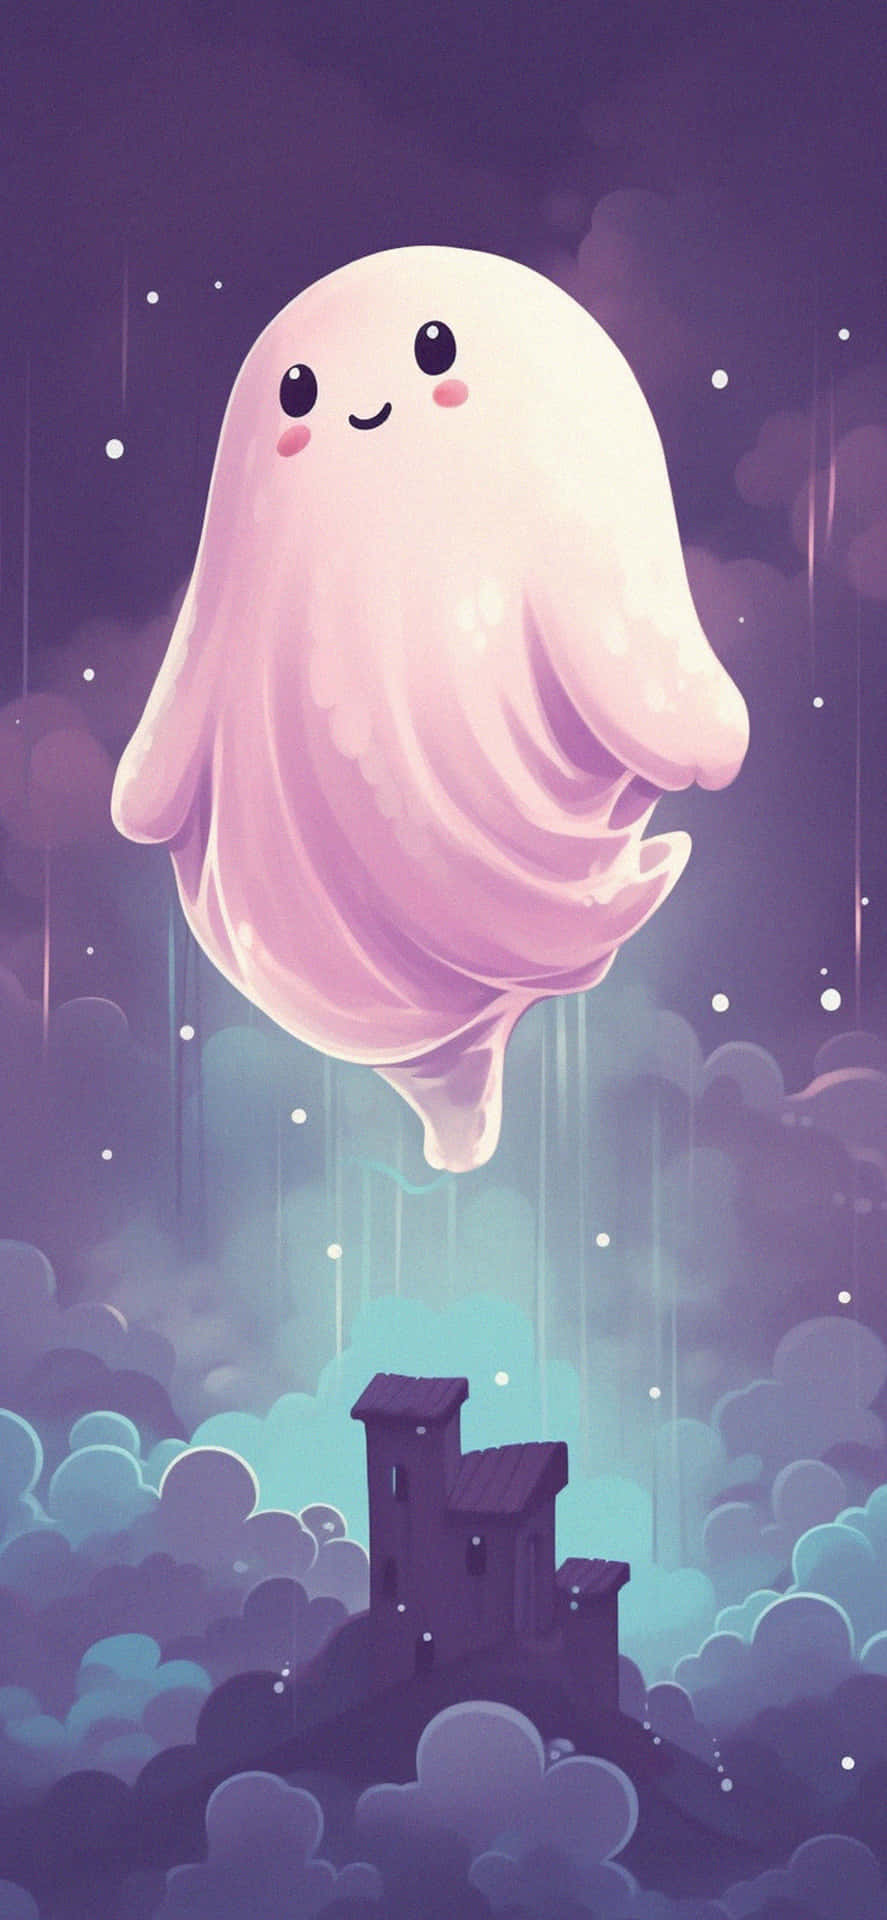 Adorable Ghost Over Mystical Castle Wallpaper